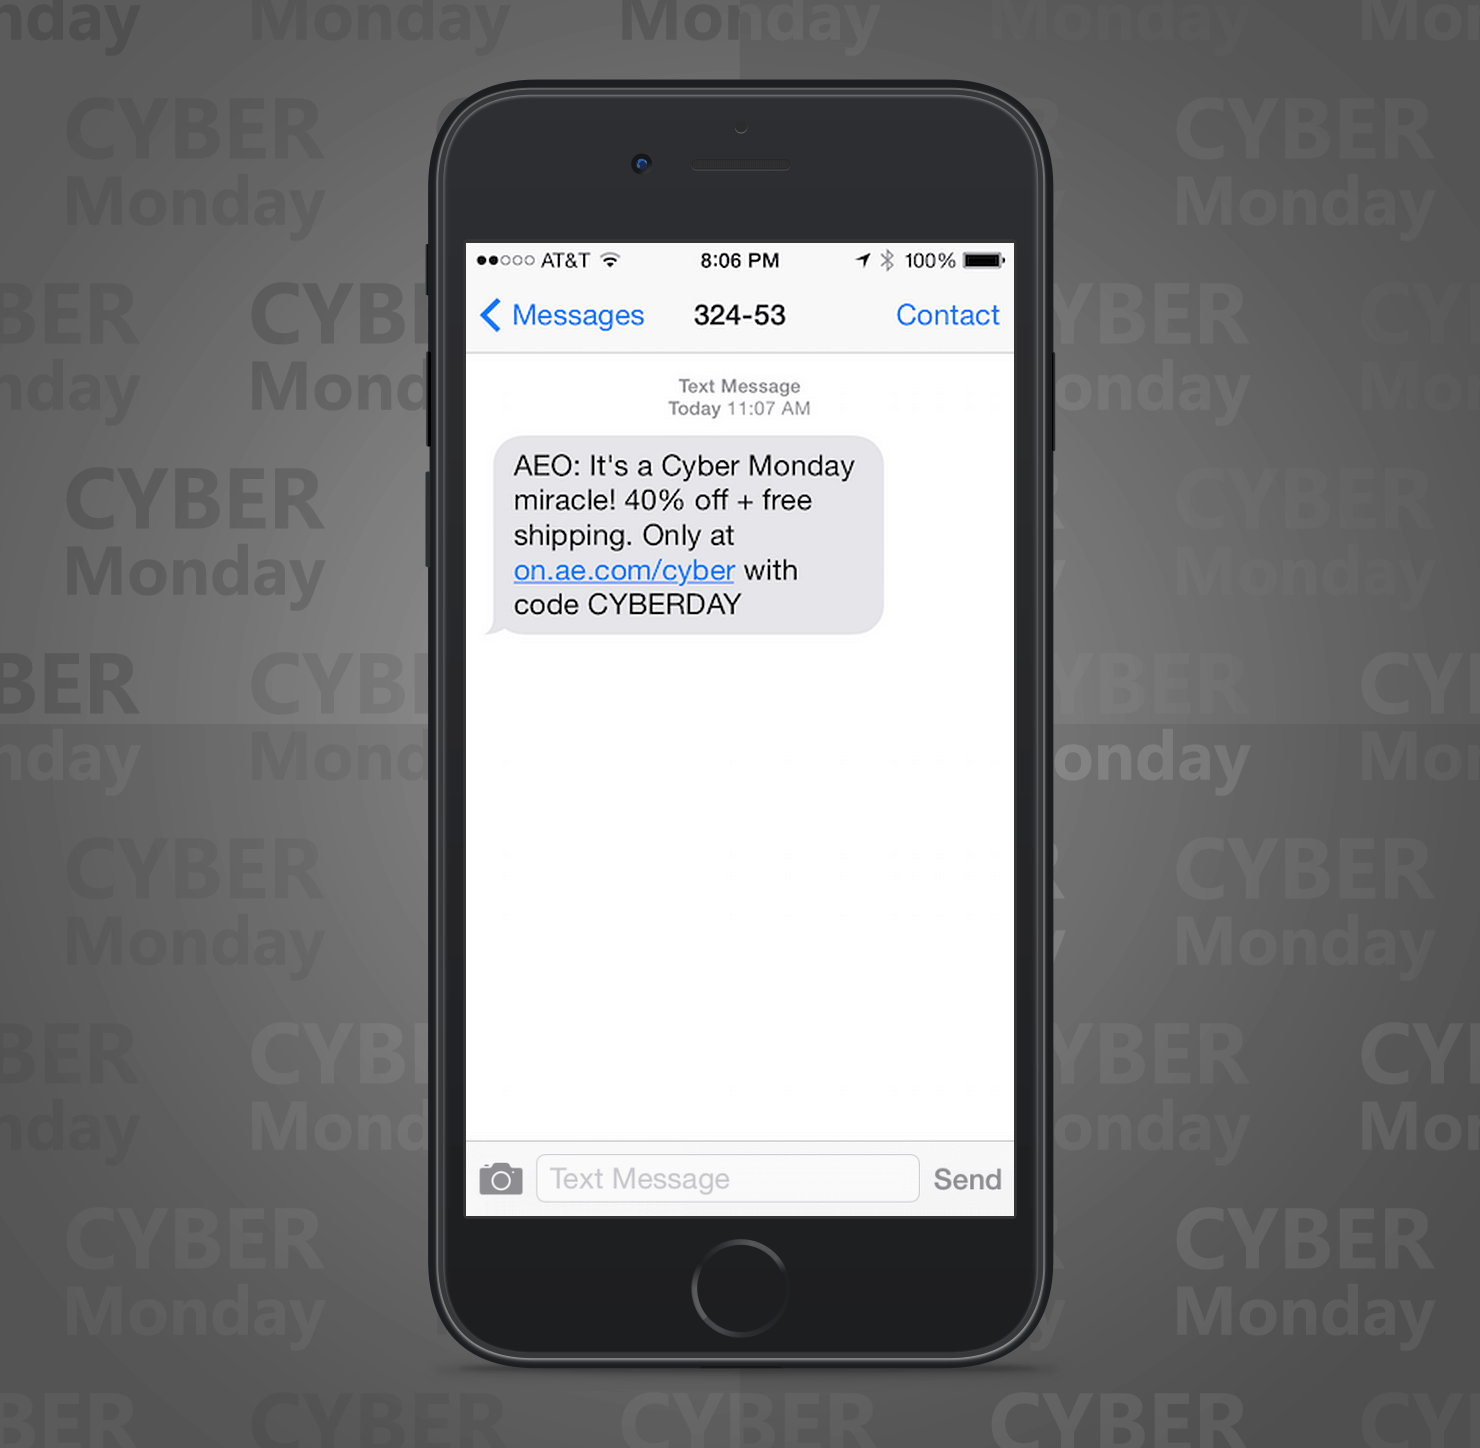 SMS Coupon Example Sent on Cyber Monday From American Eagle Retail Stores to Customers